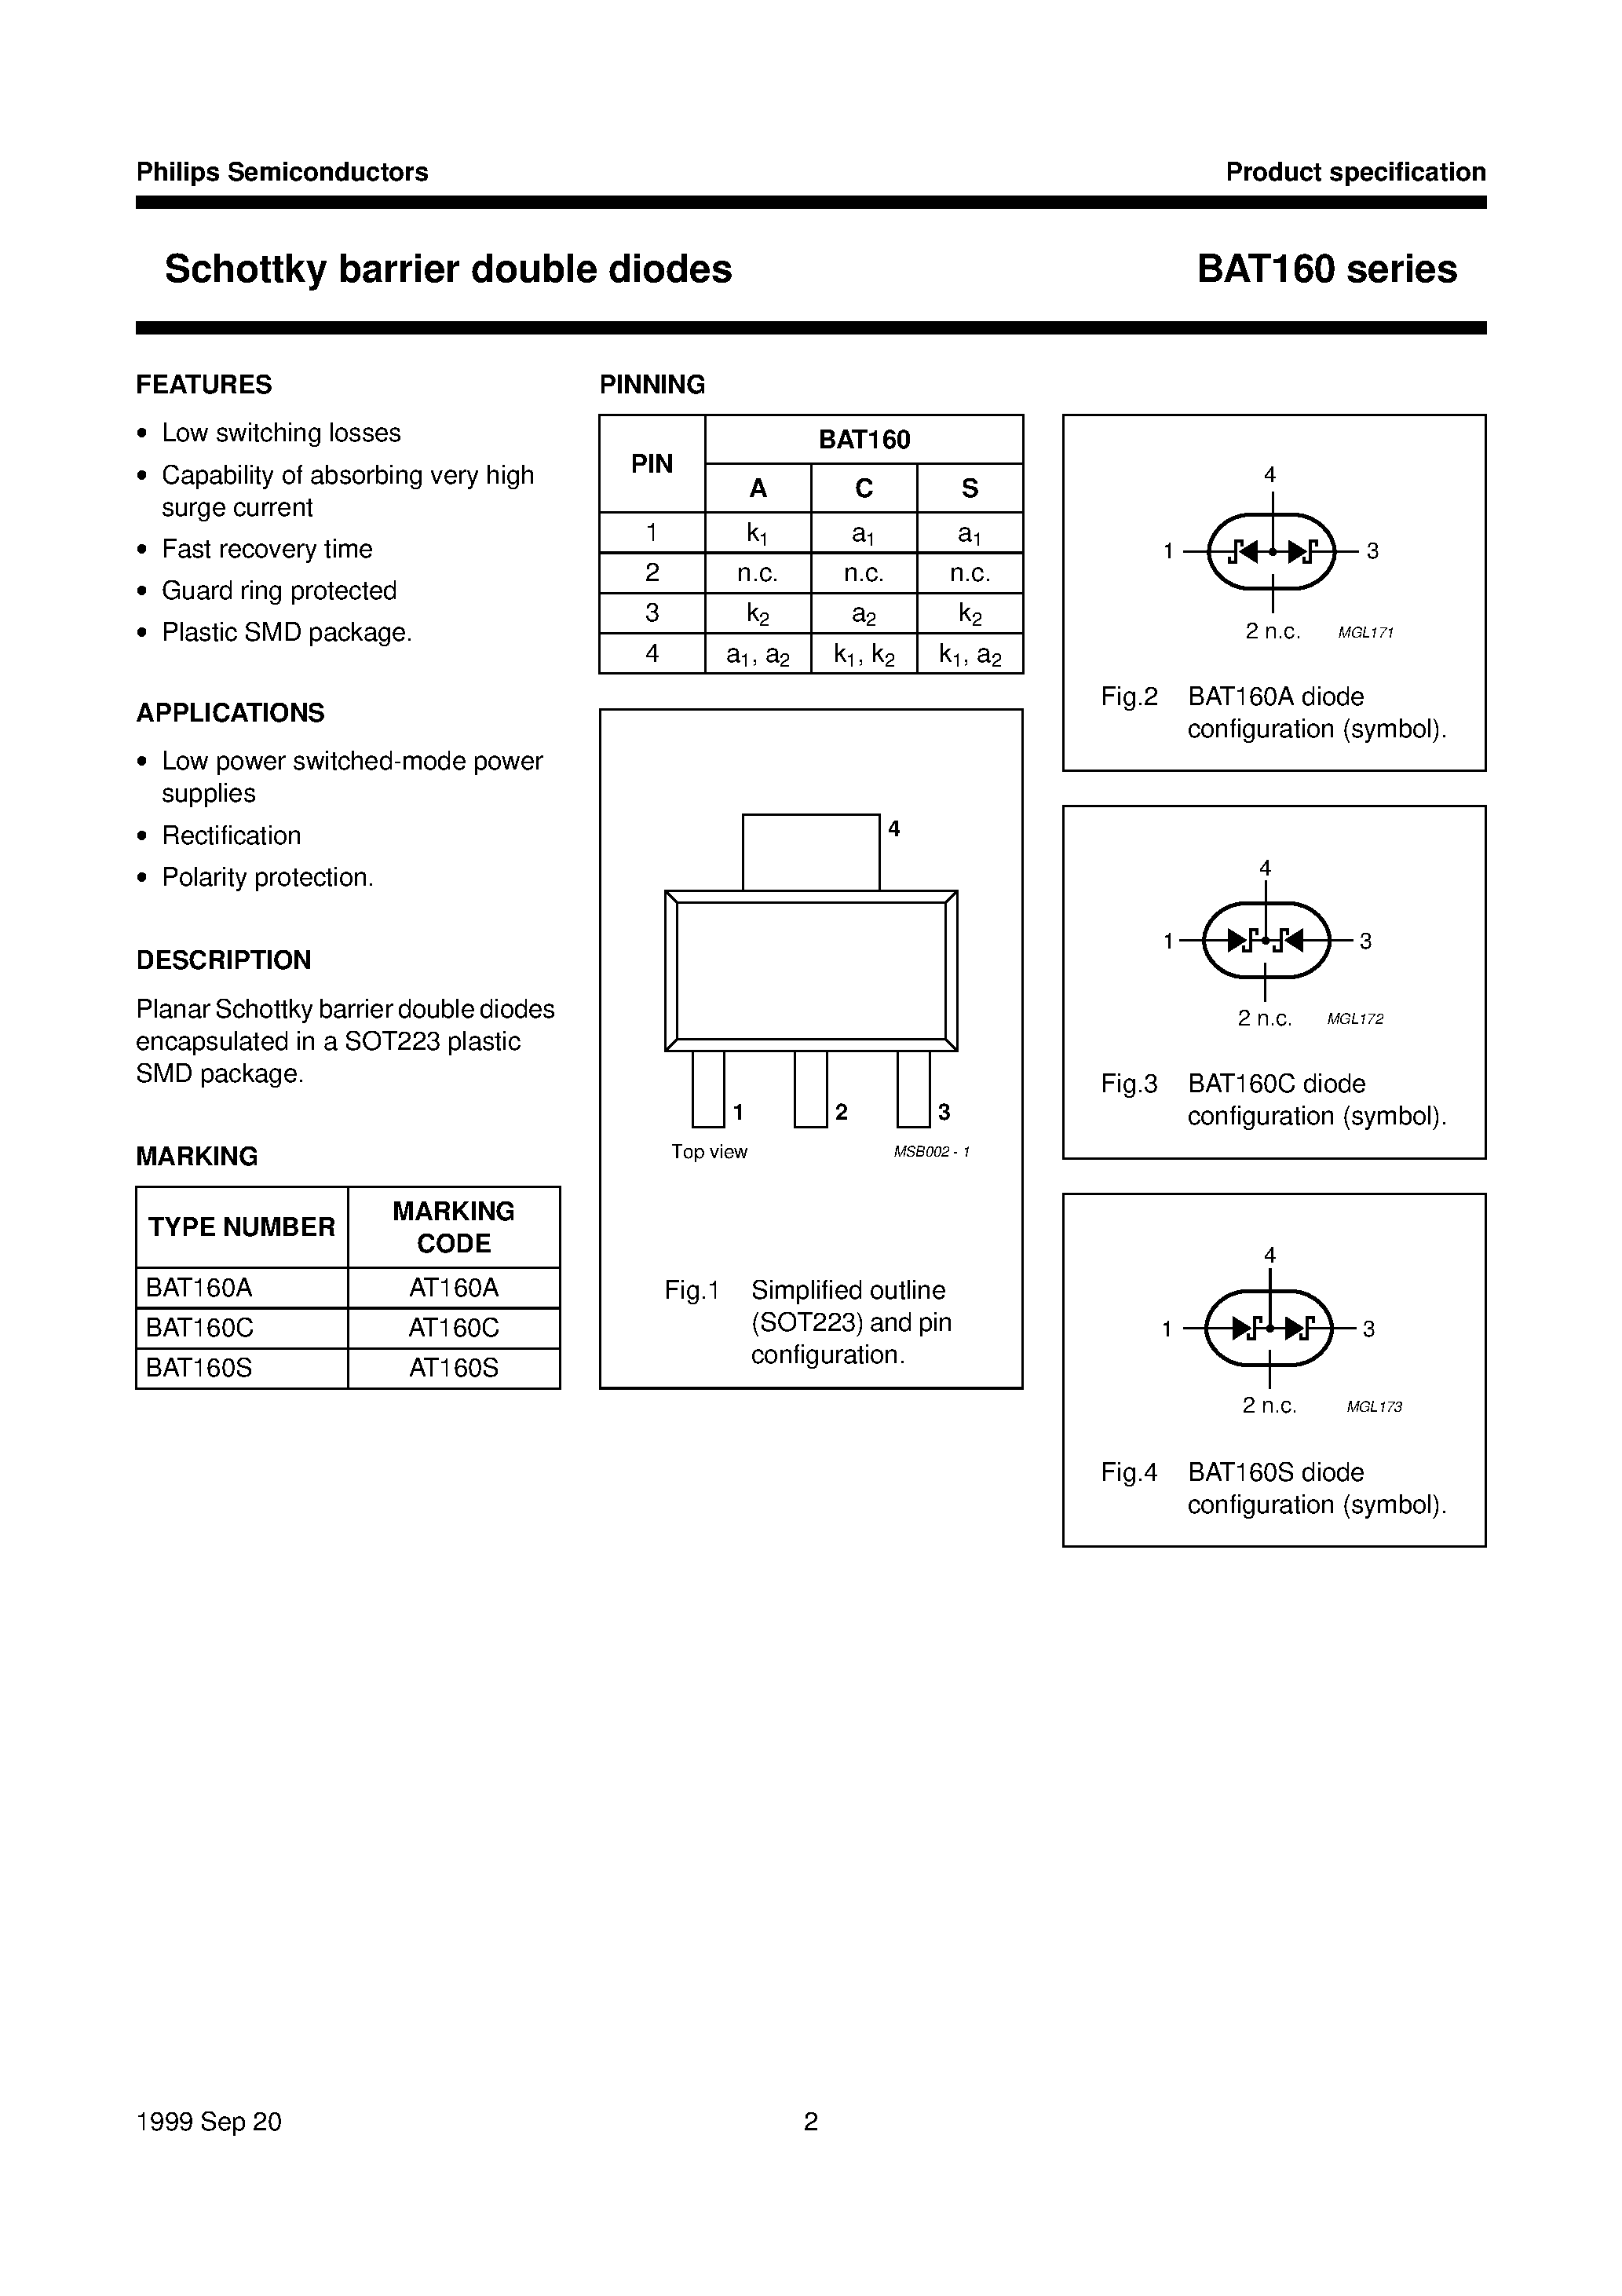 Datasheet BAT160A - Schottky barrier double diodes page 2